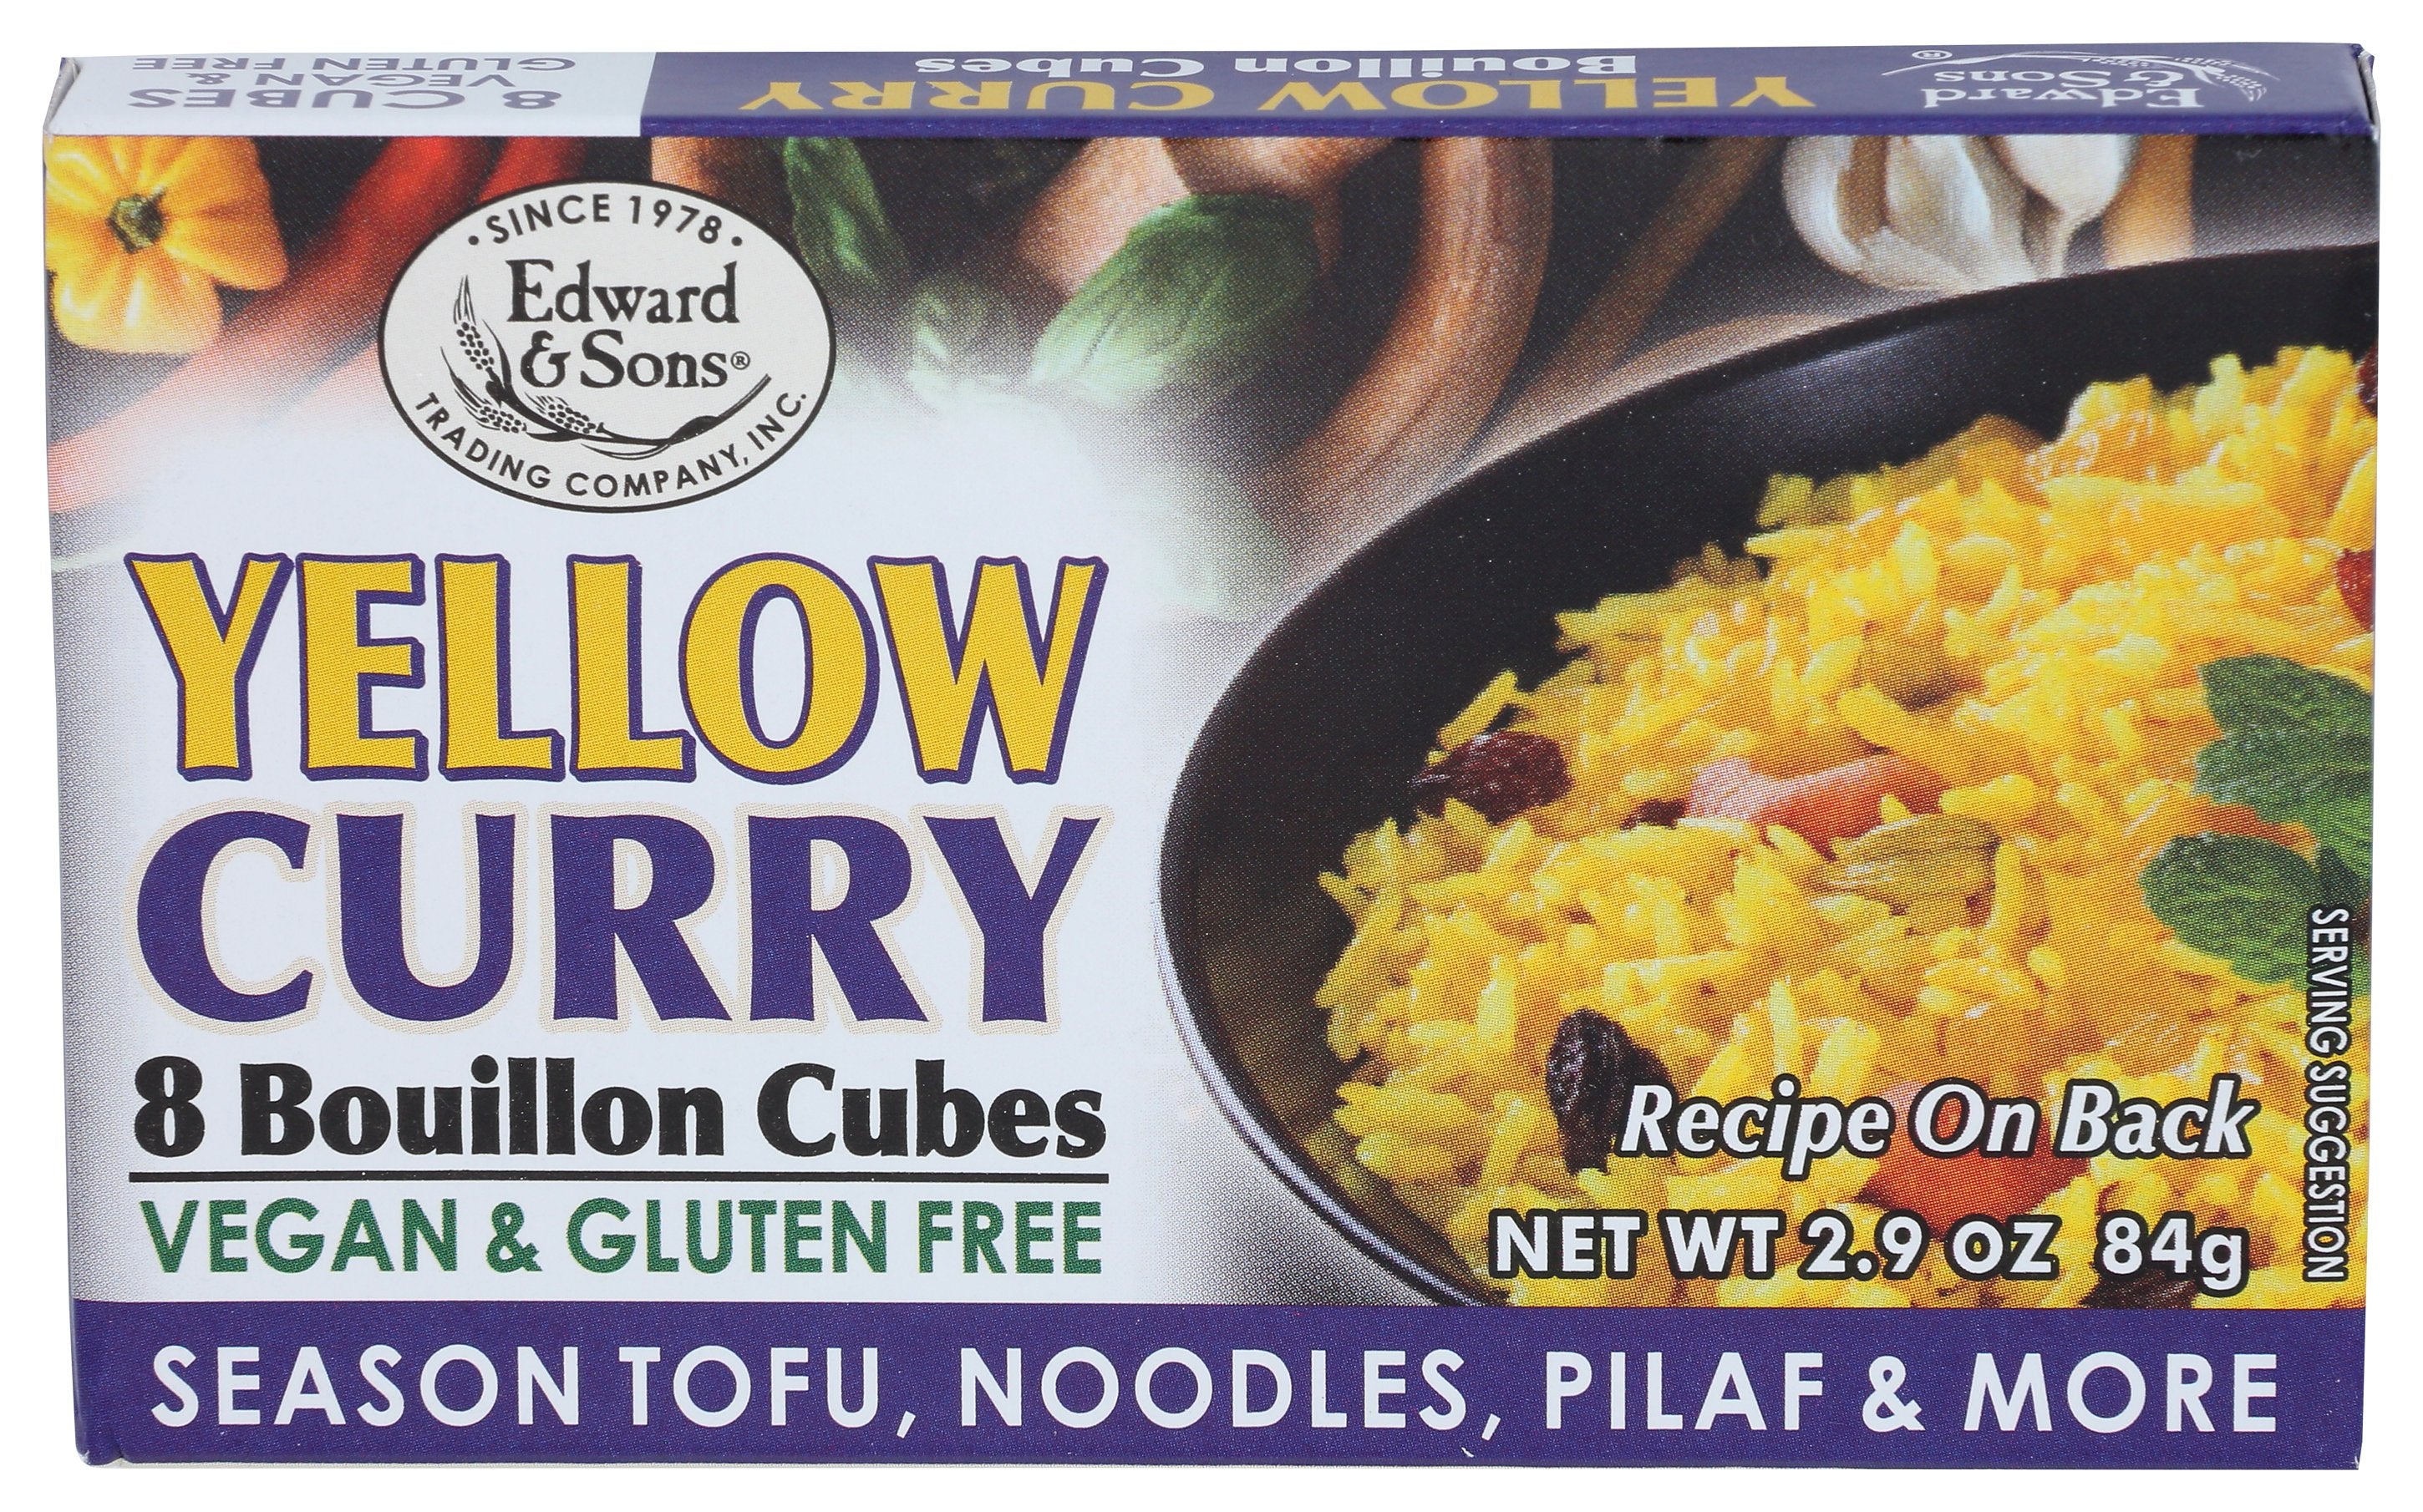 EDWARD & SONS BROTH-YELLOW CURRY CUBE 2.9 OZ - Case of 12